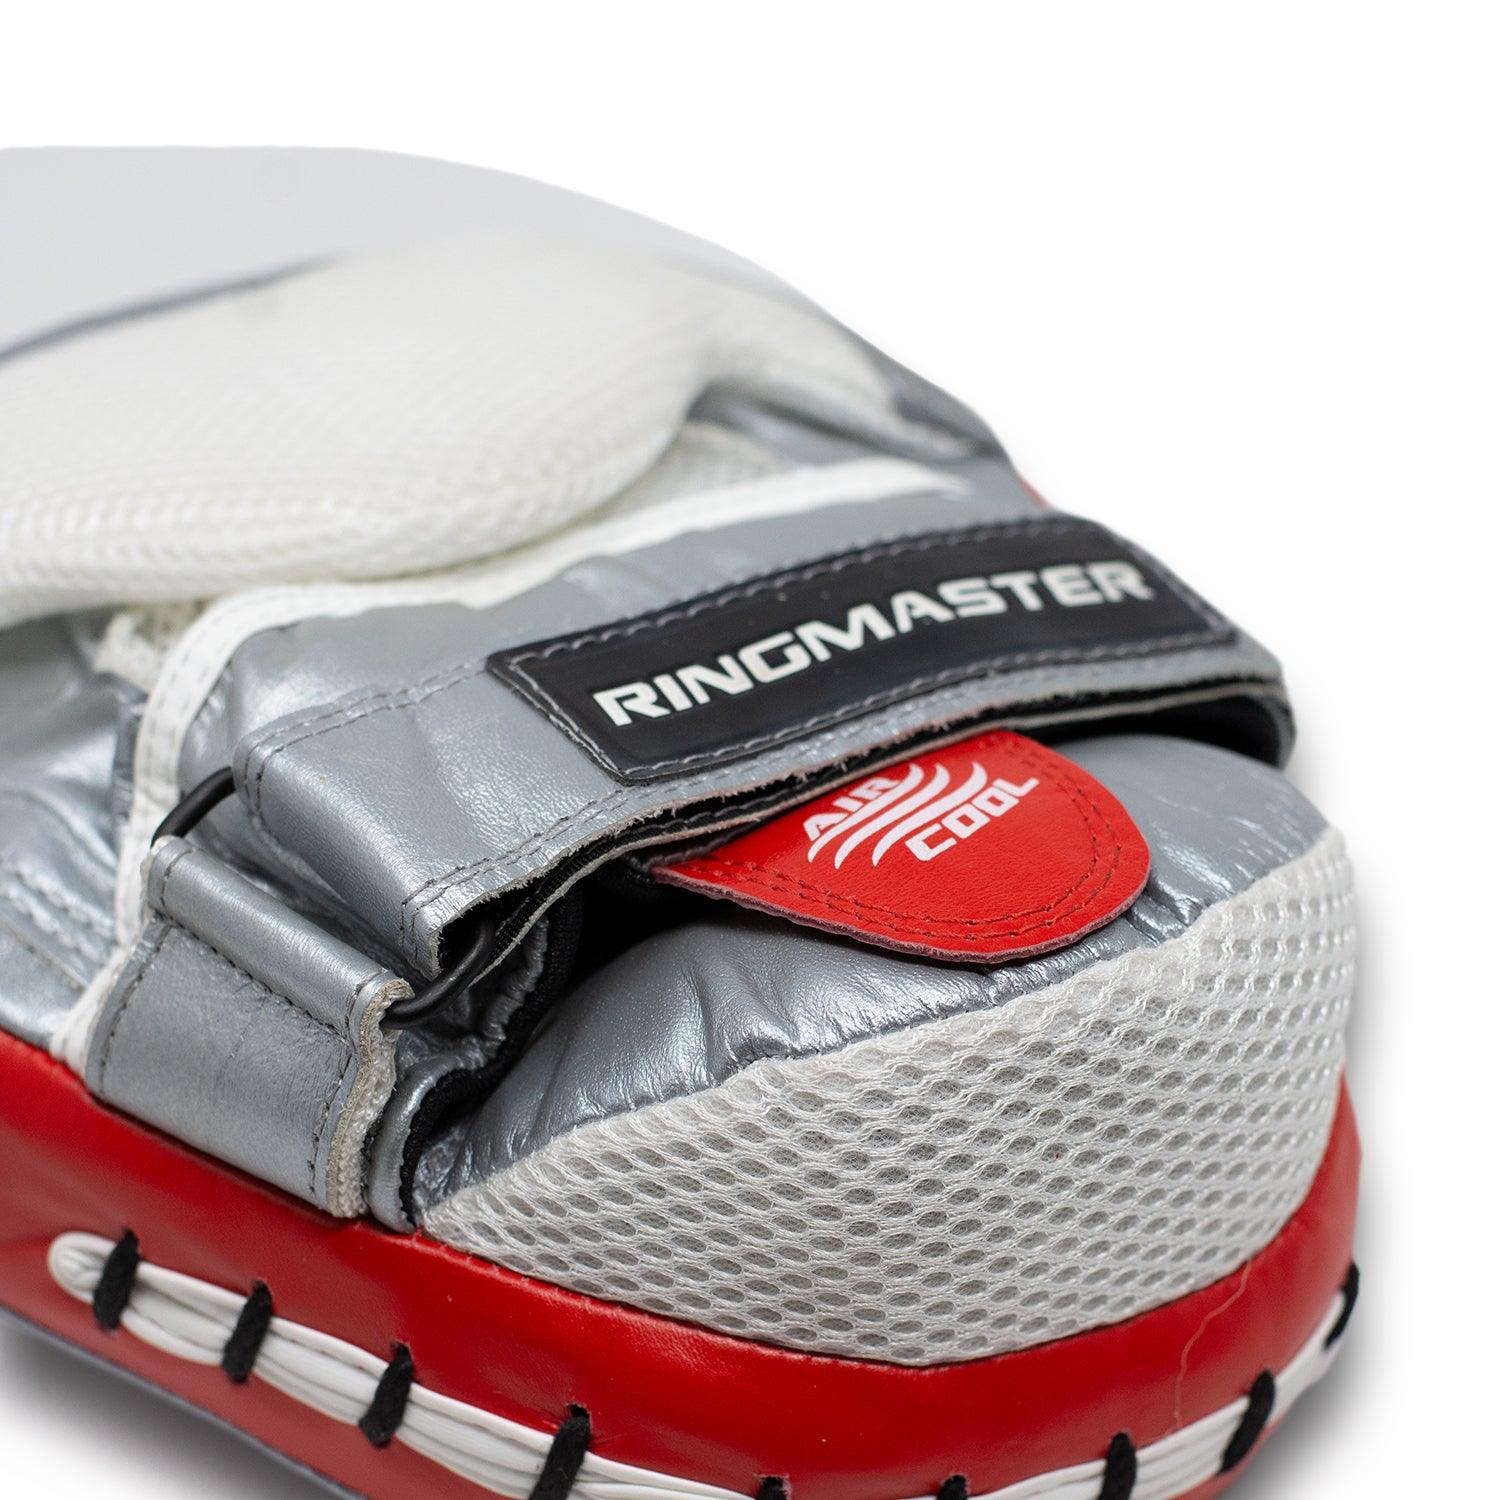 RingMaster Sports Focus pads Genuine Leather PGL 3.0 Red and Silver image 4